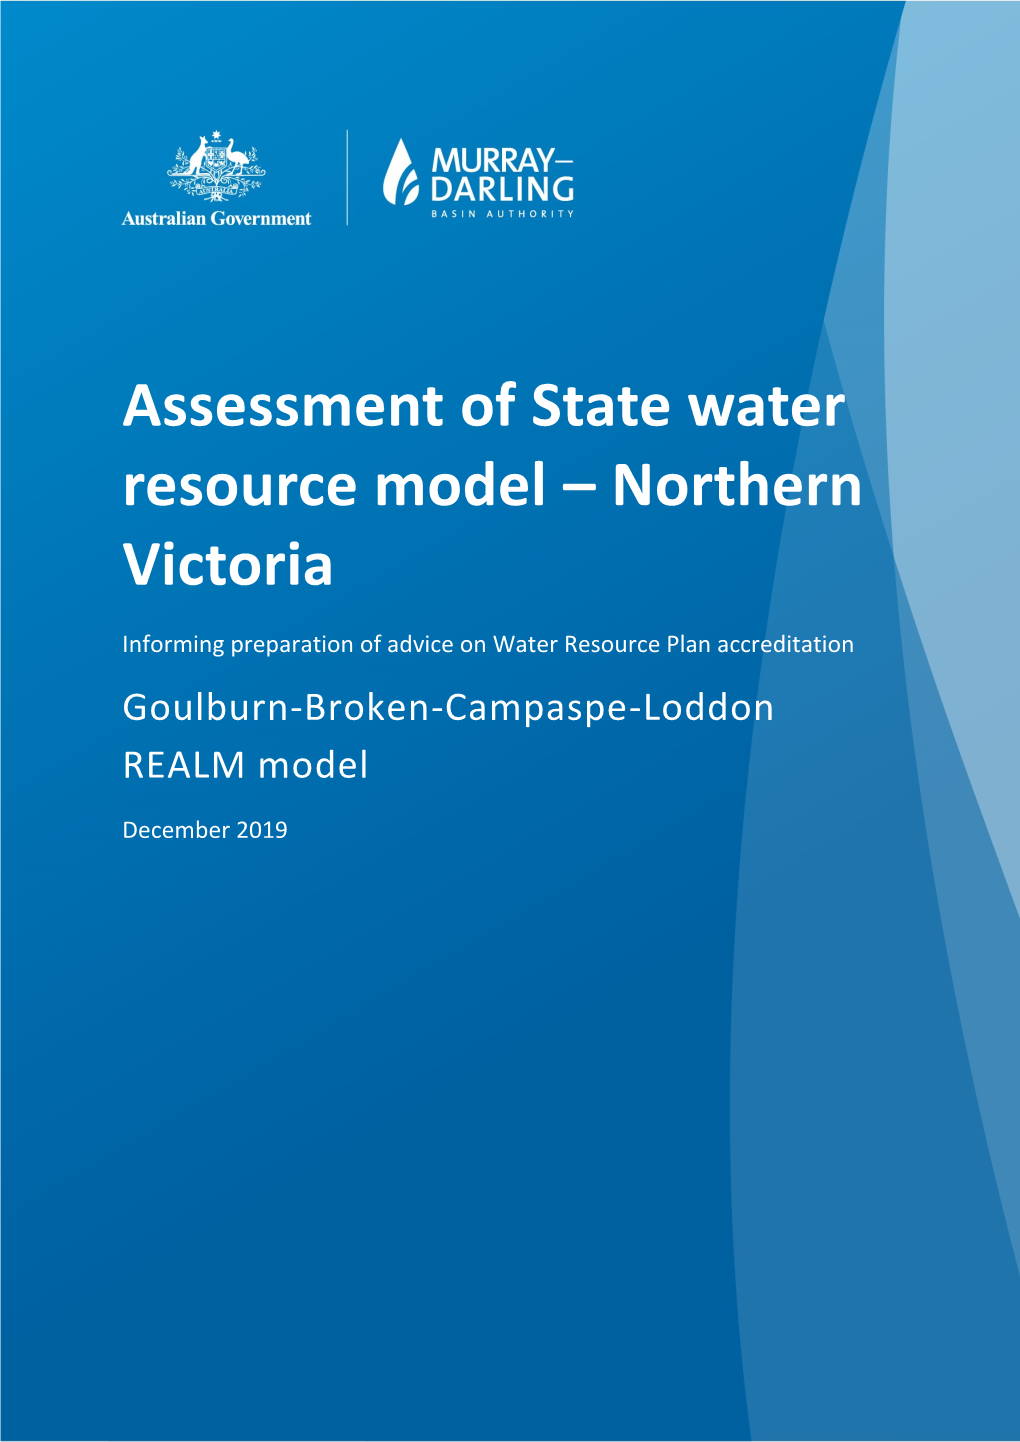 Assessment of State Water Resource Model – Northern Victoria